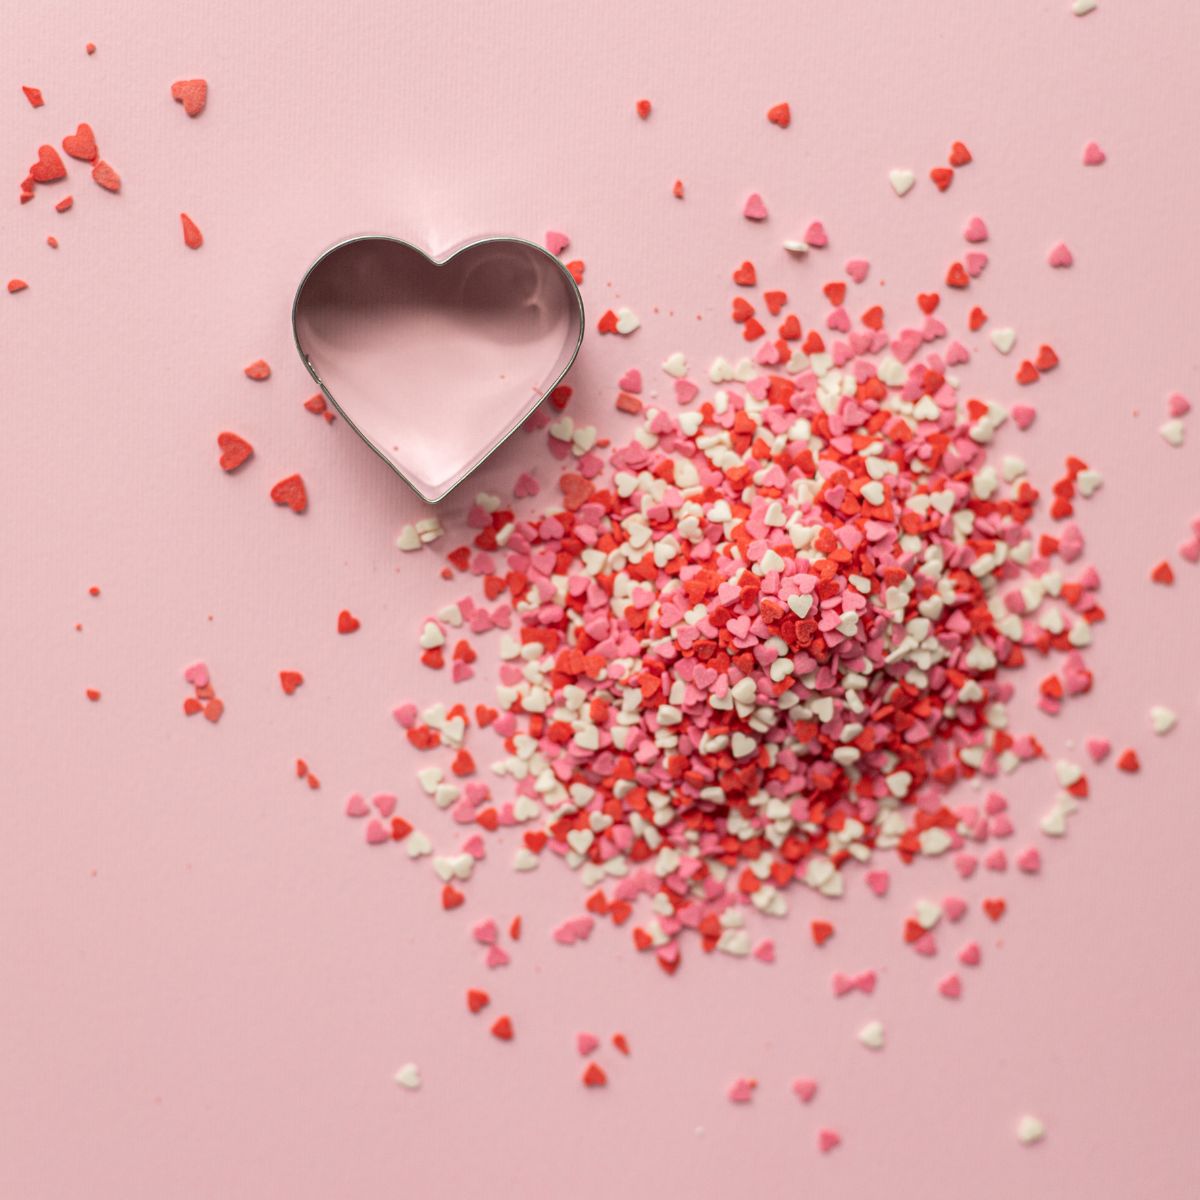 Pink background with small pink, red and white heart shaped sprinkles in a pile and a metal heart shaped cookie cutter next to them.